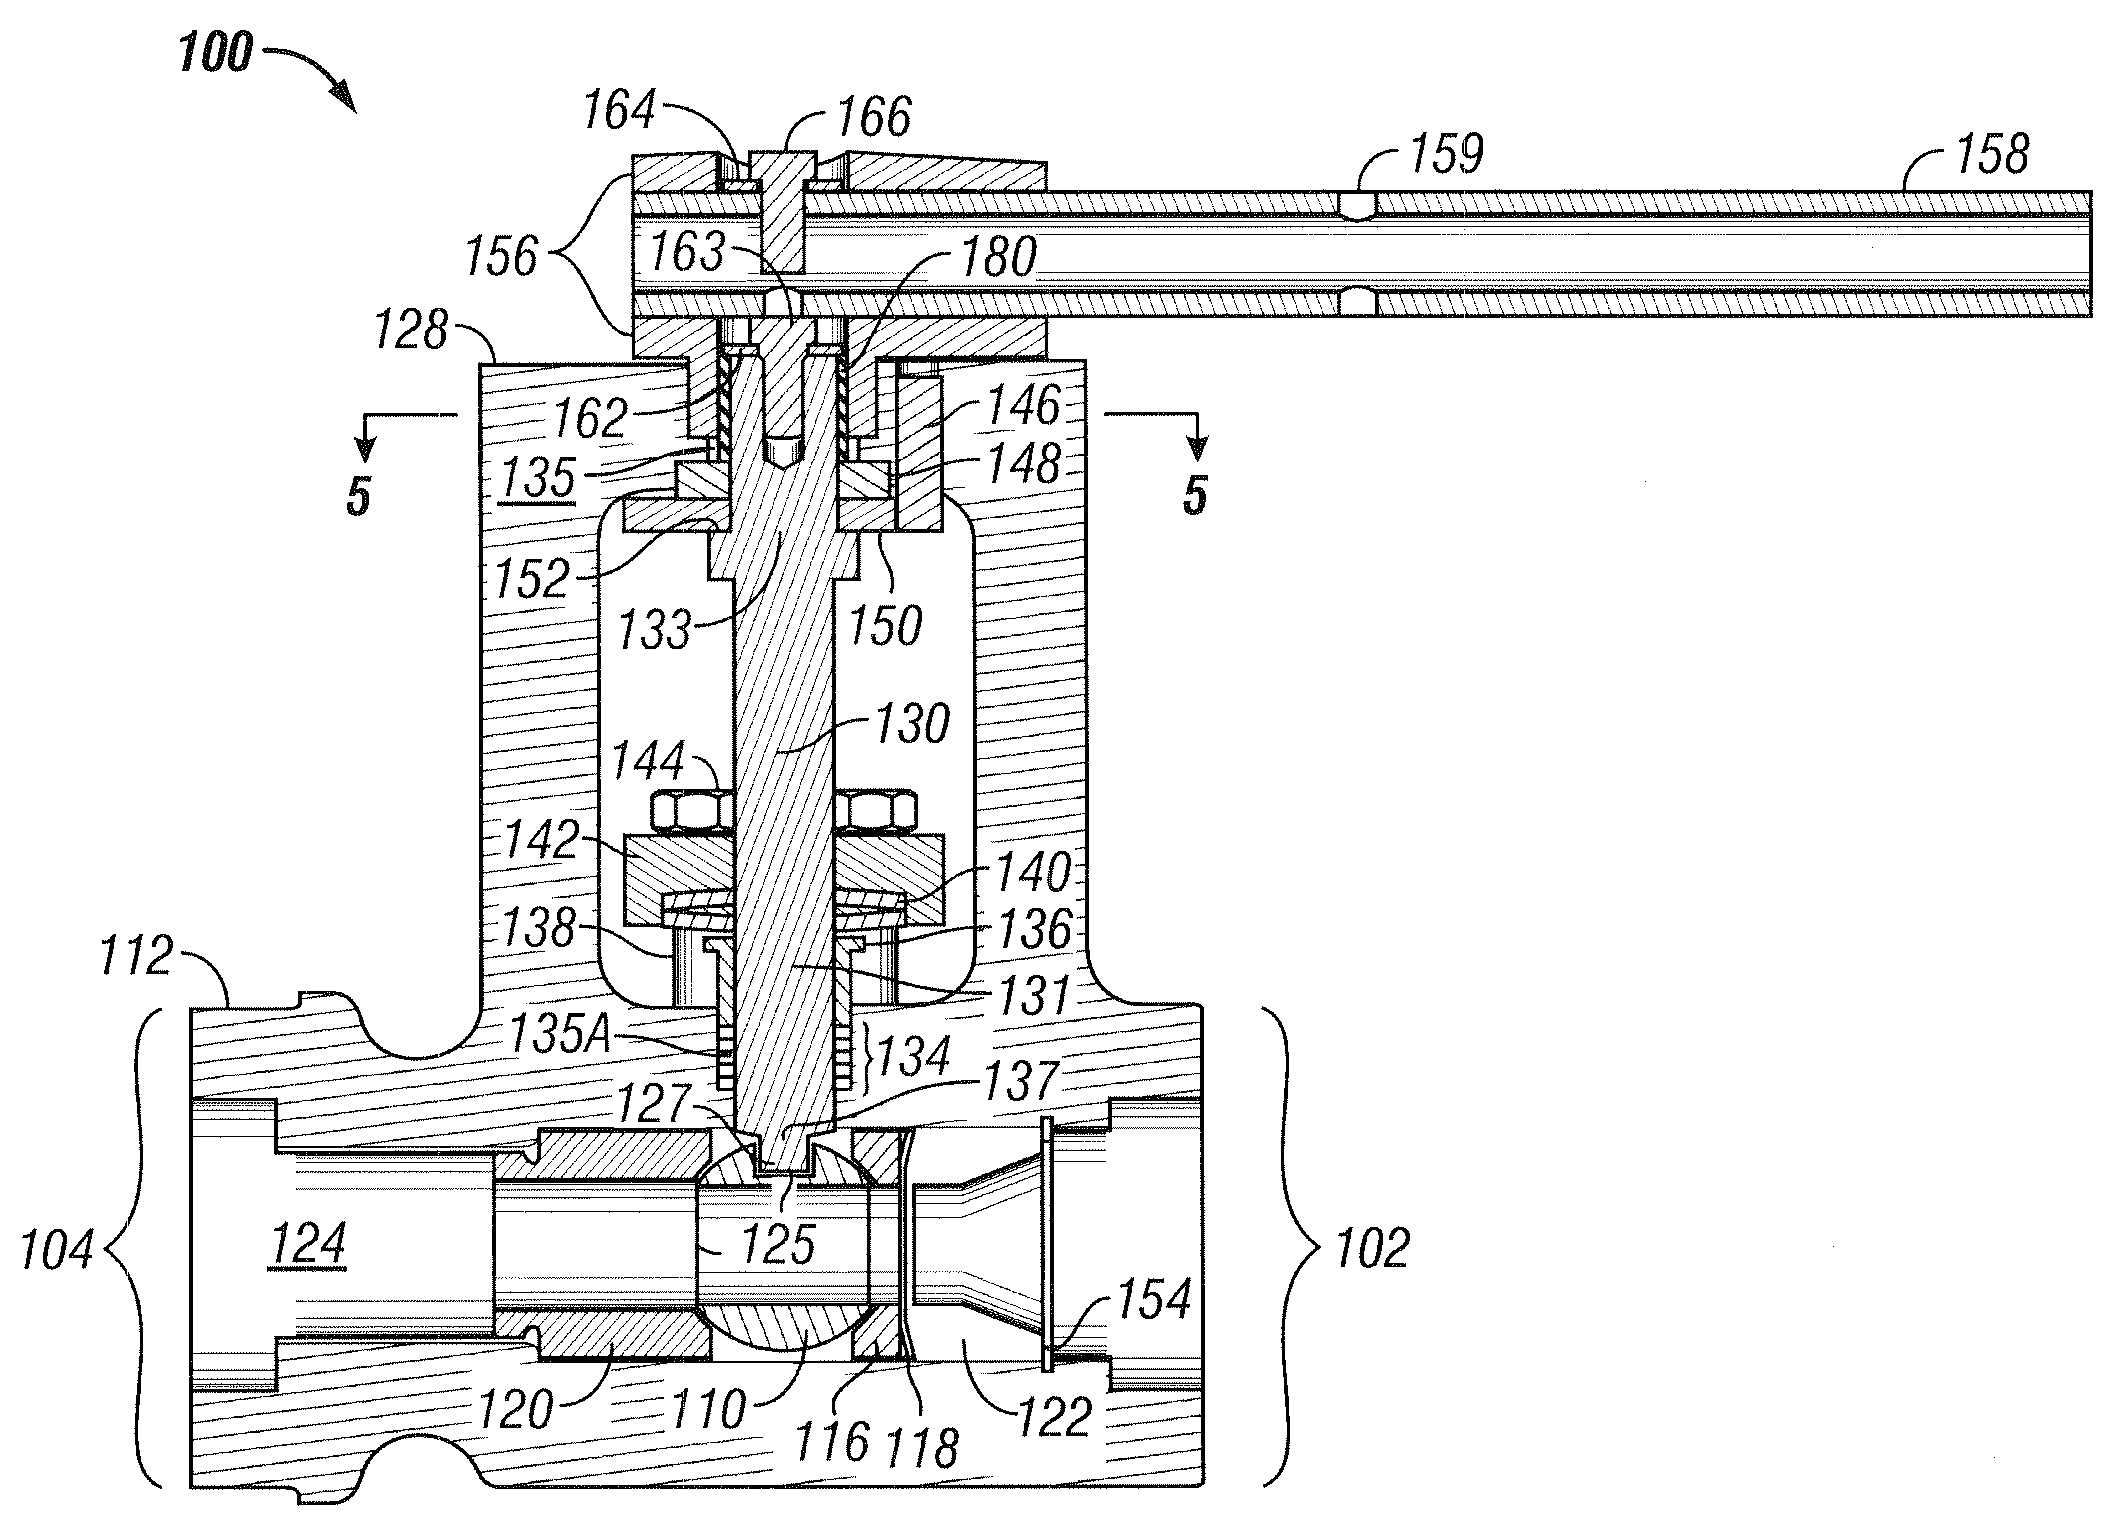 Ball valve with shear bushing and integral bracket for stem blowout protection